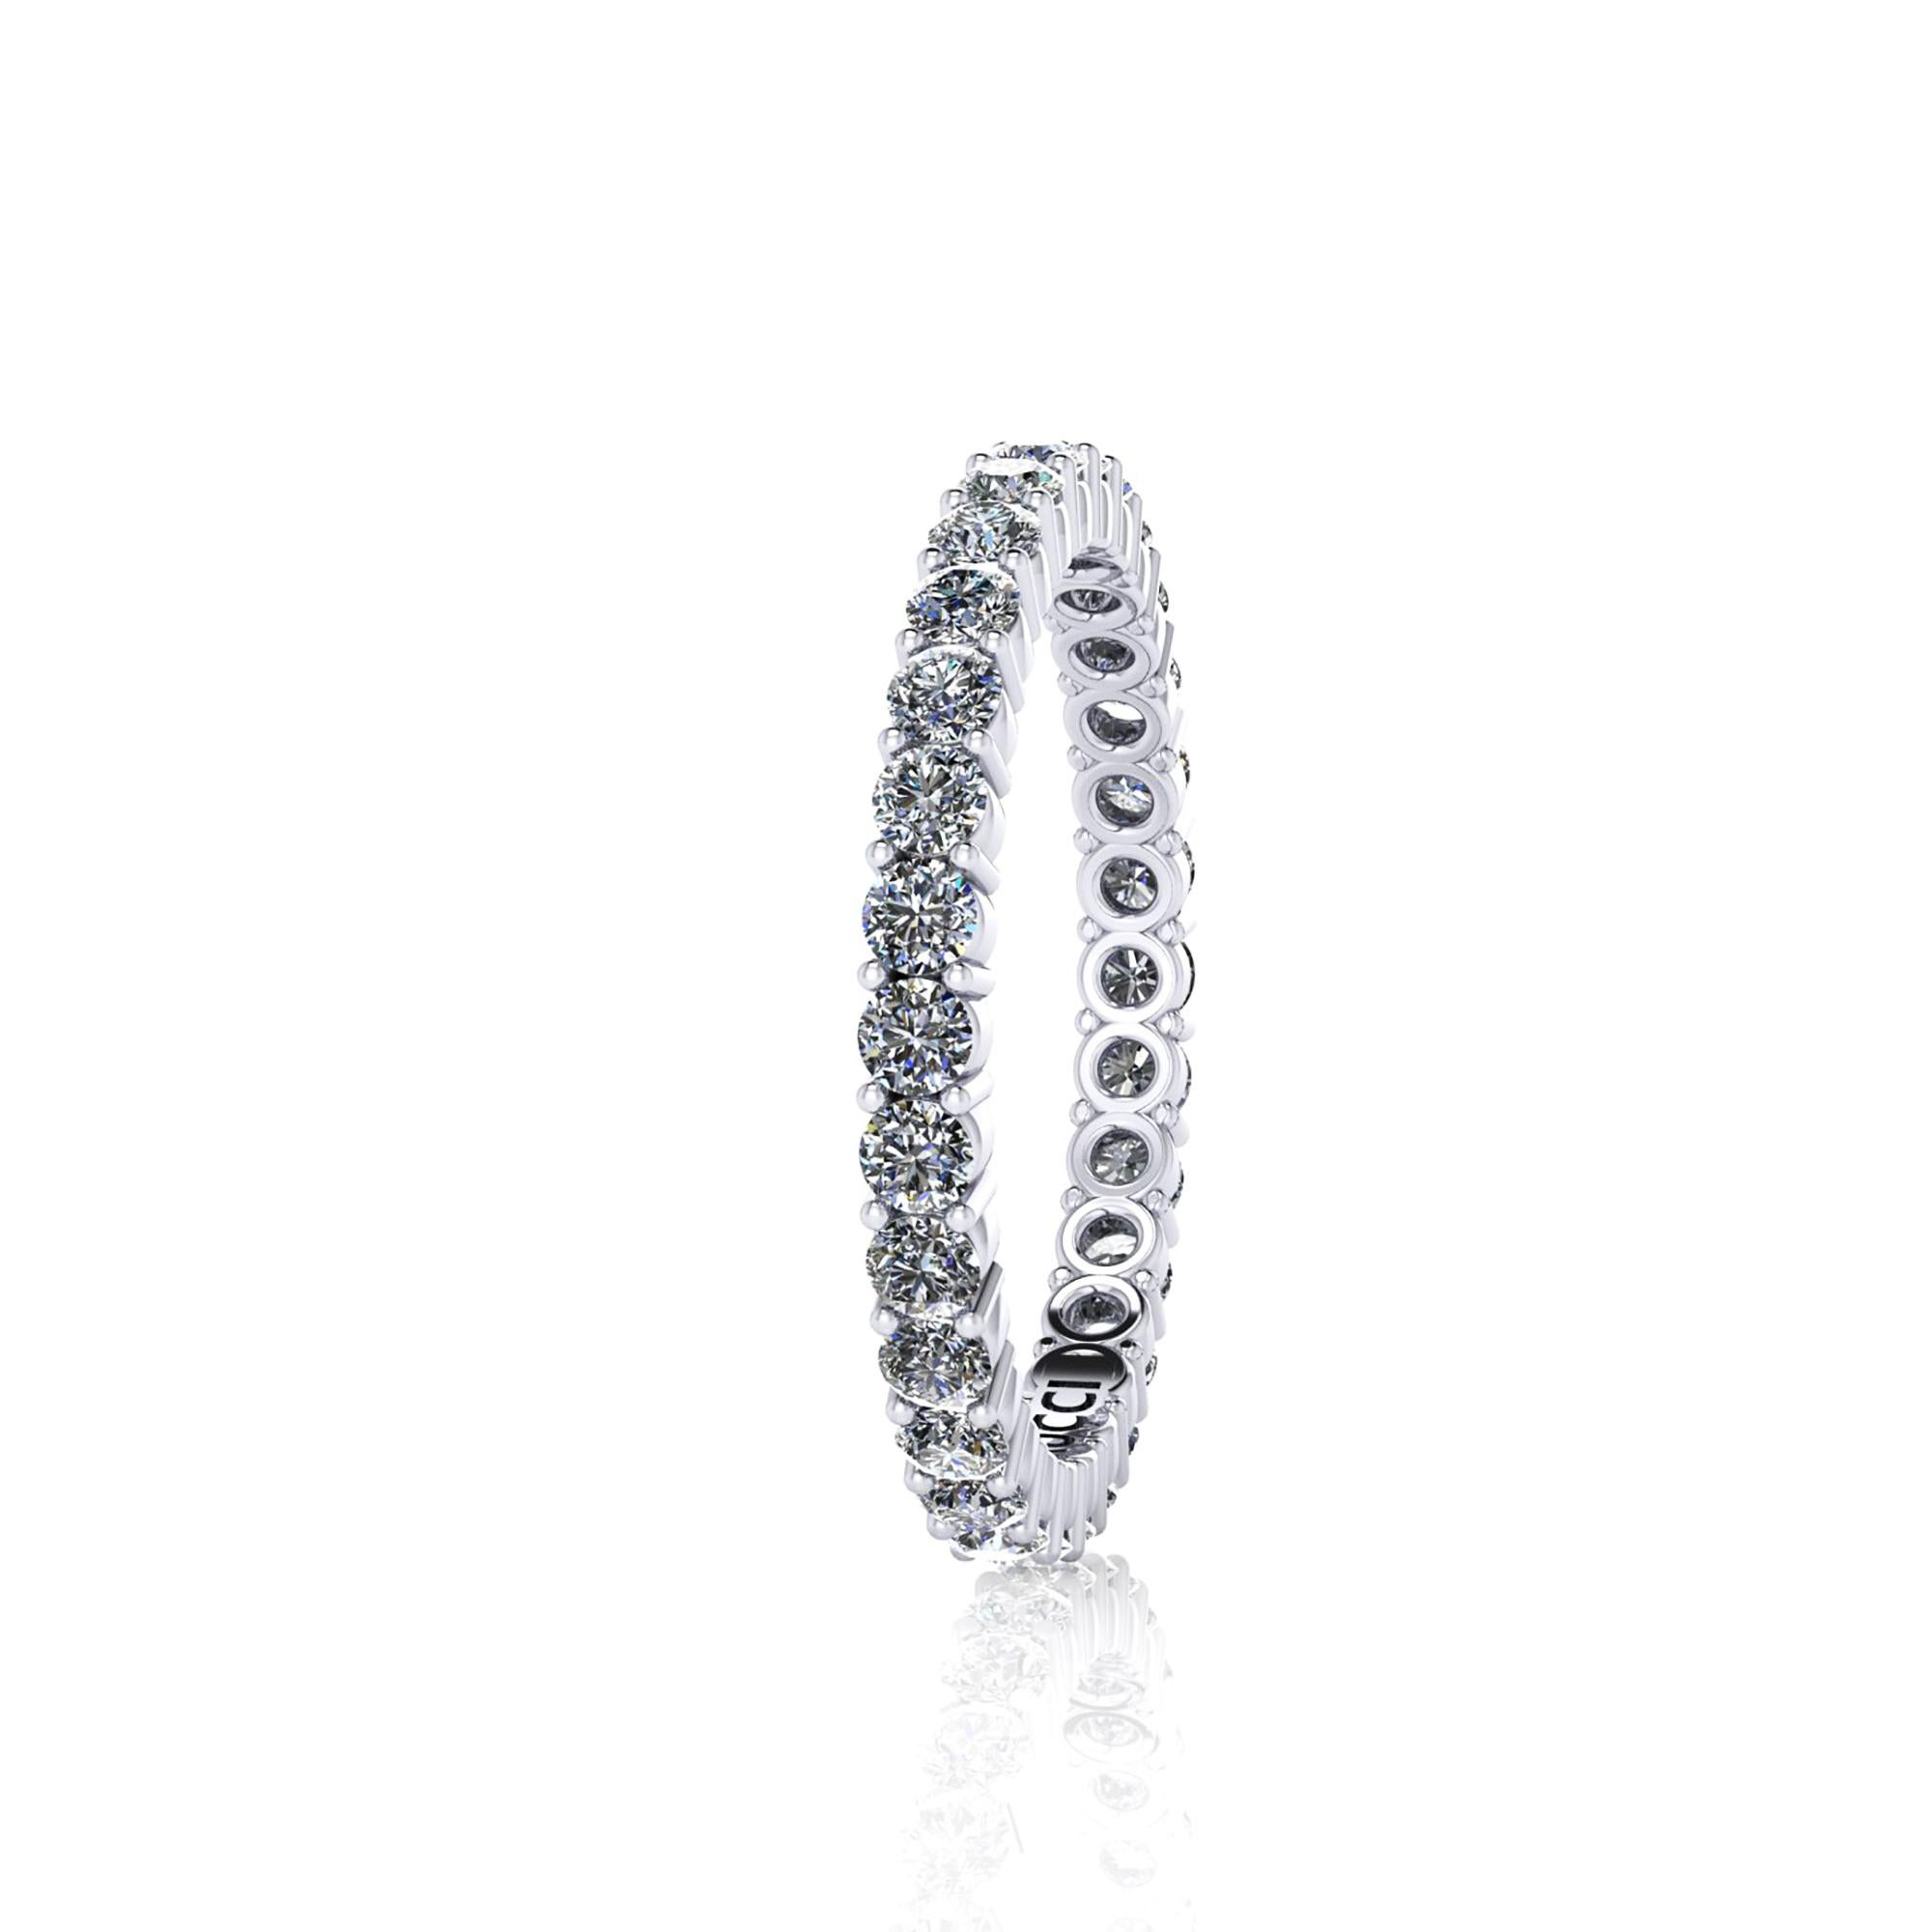 A classic beauty never ending, 1 carat of bright white diamonds G color, VS/SI1+++ clarity, set to perfection in a hand crafted 18k white gold eternity band, 2.1 mm wide, stackable collection, made in New York with the best Italian craftsmanship,